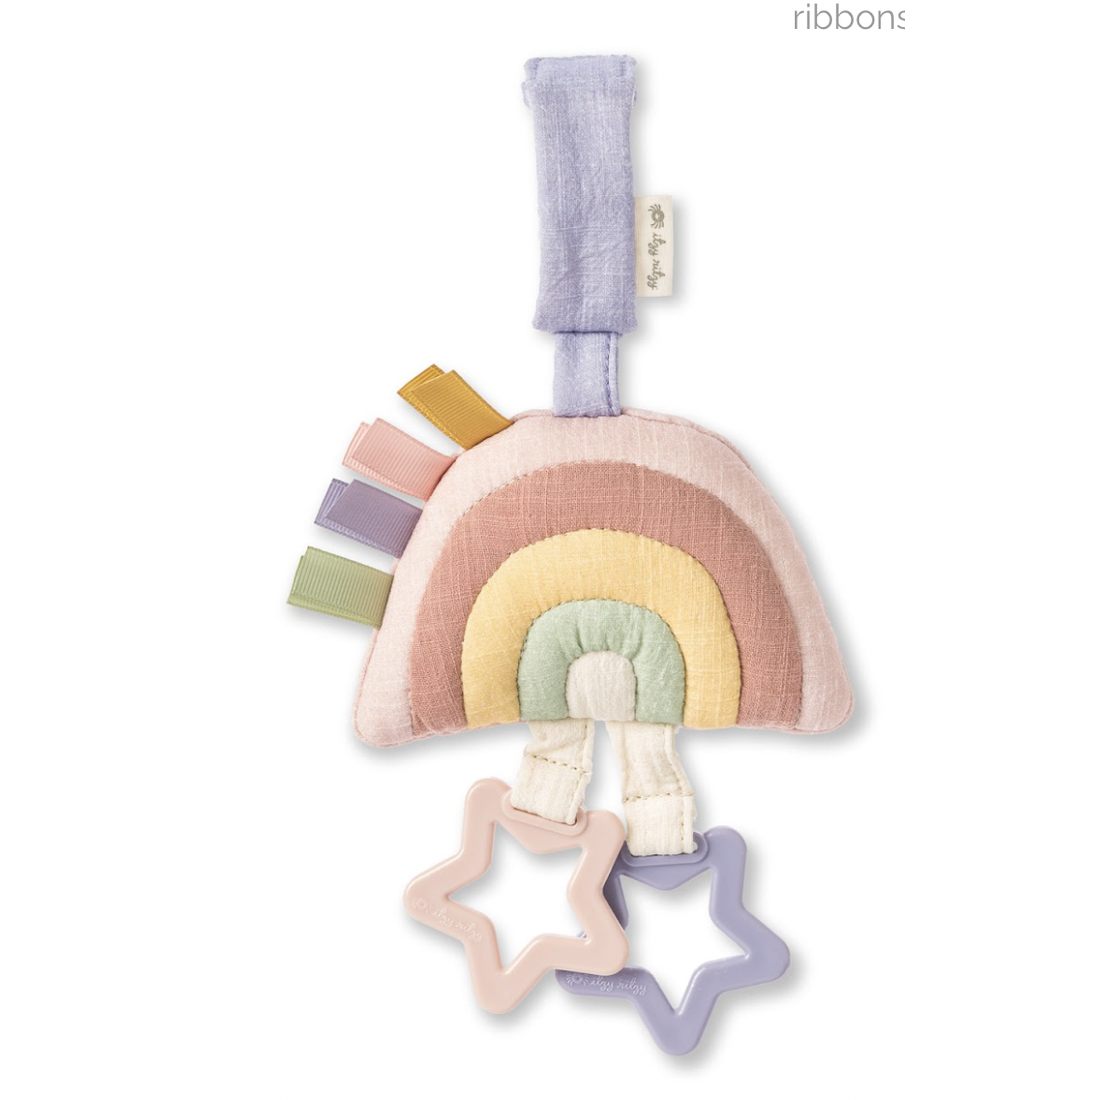 Itzy Ritzy pink rainbow attachable travel toy against white backdrop